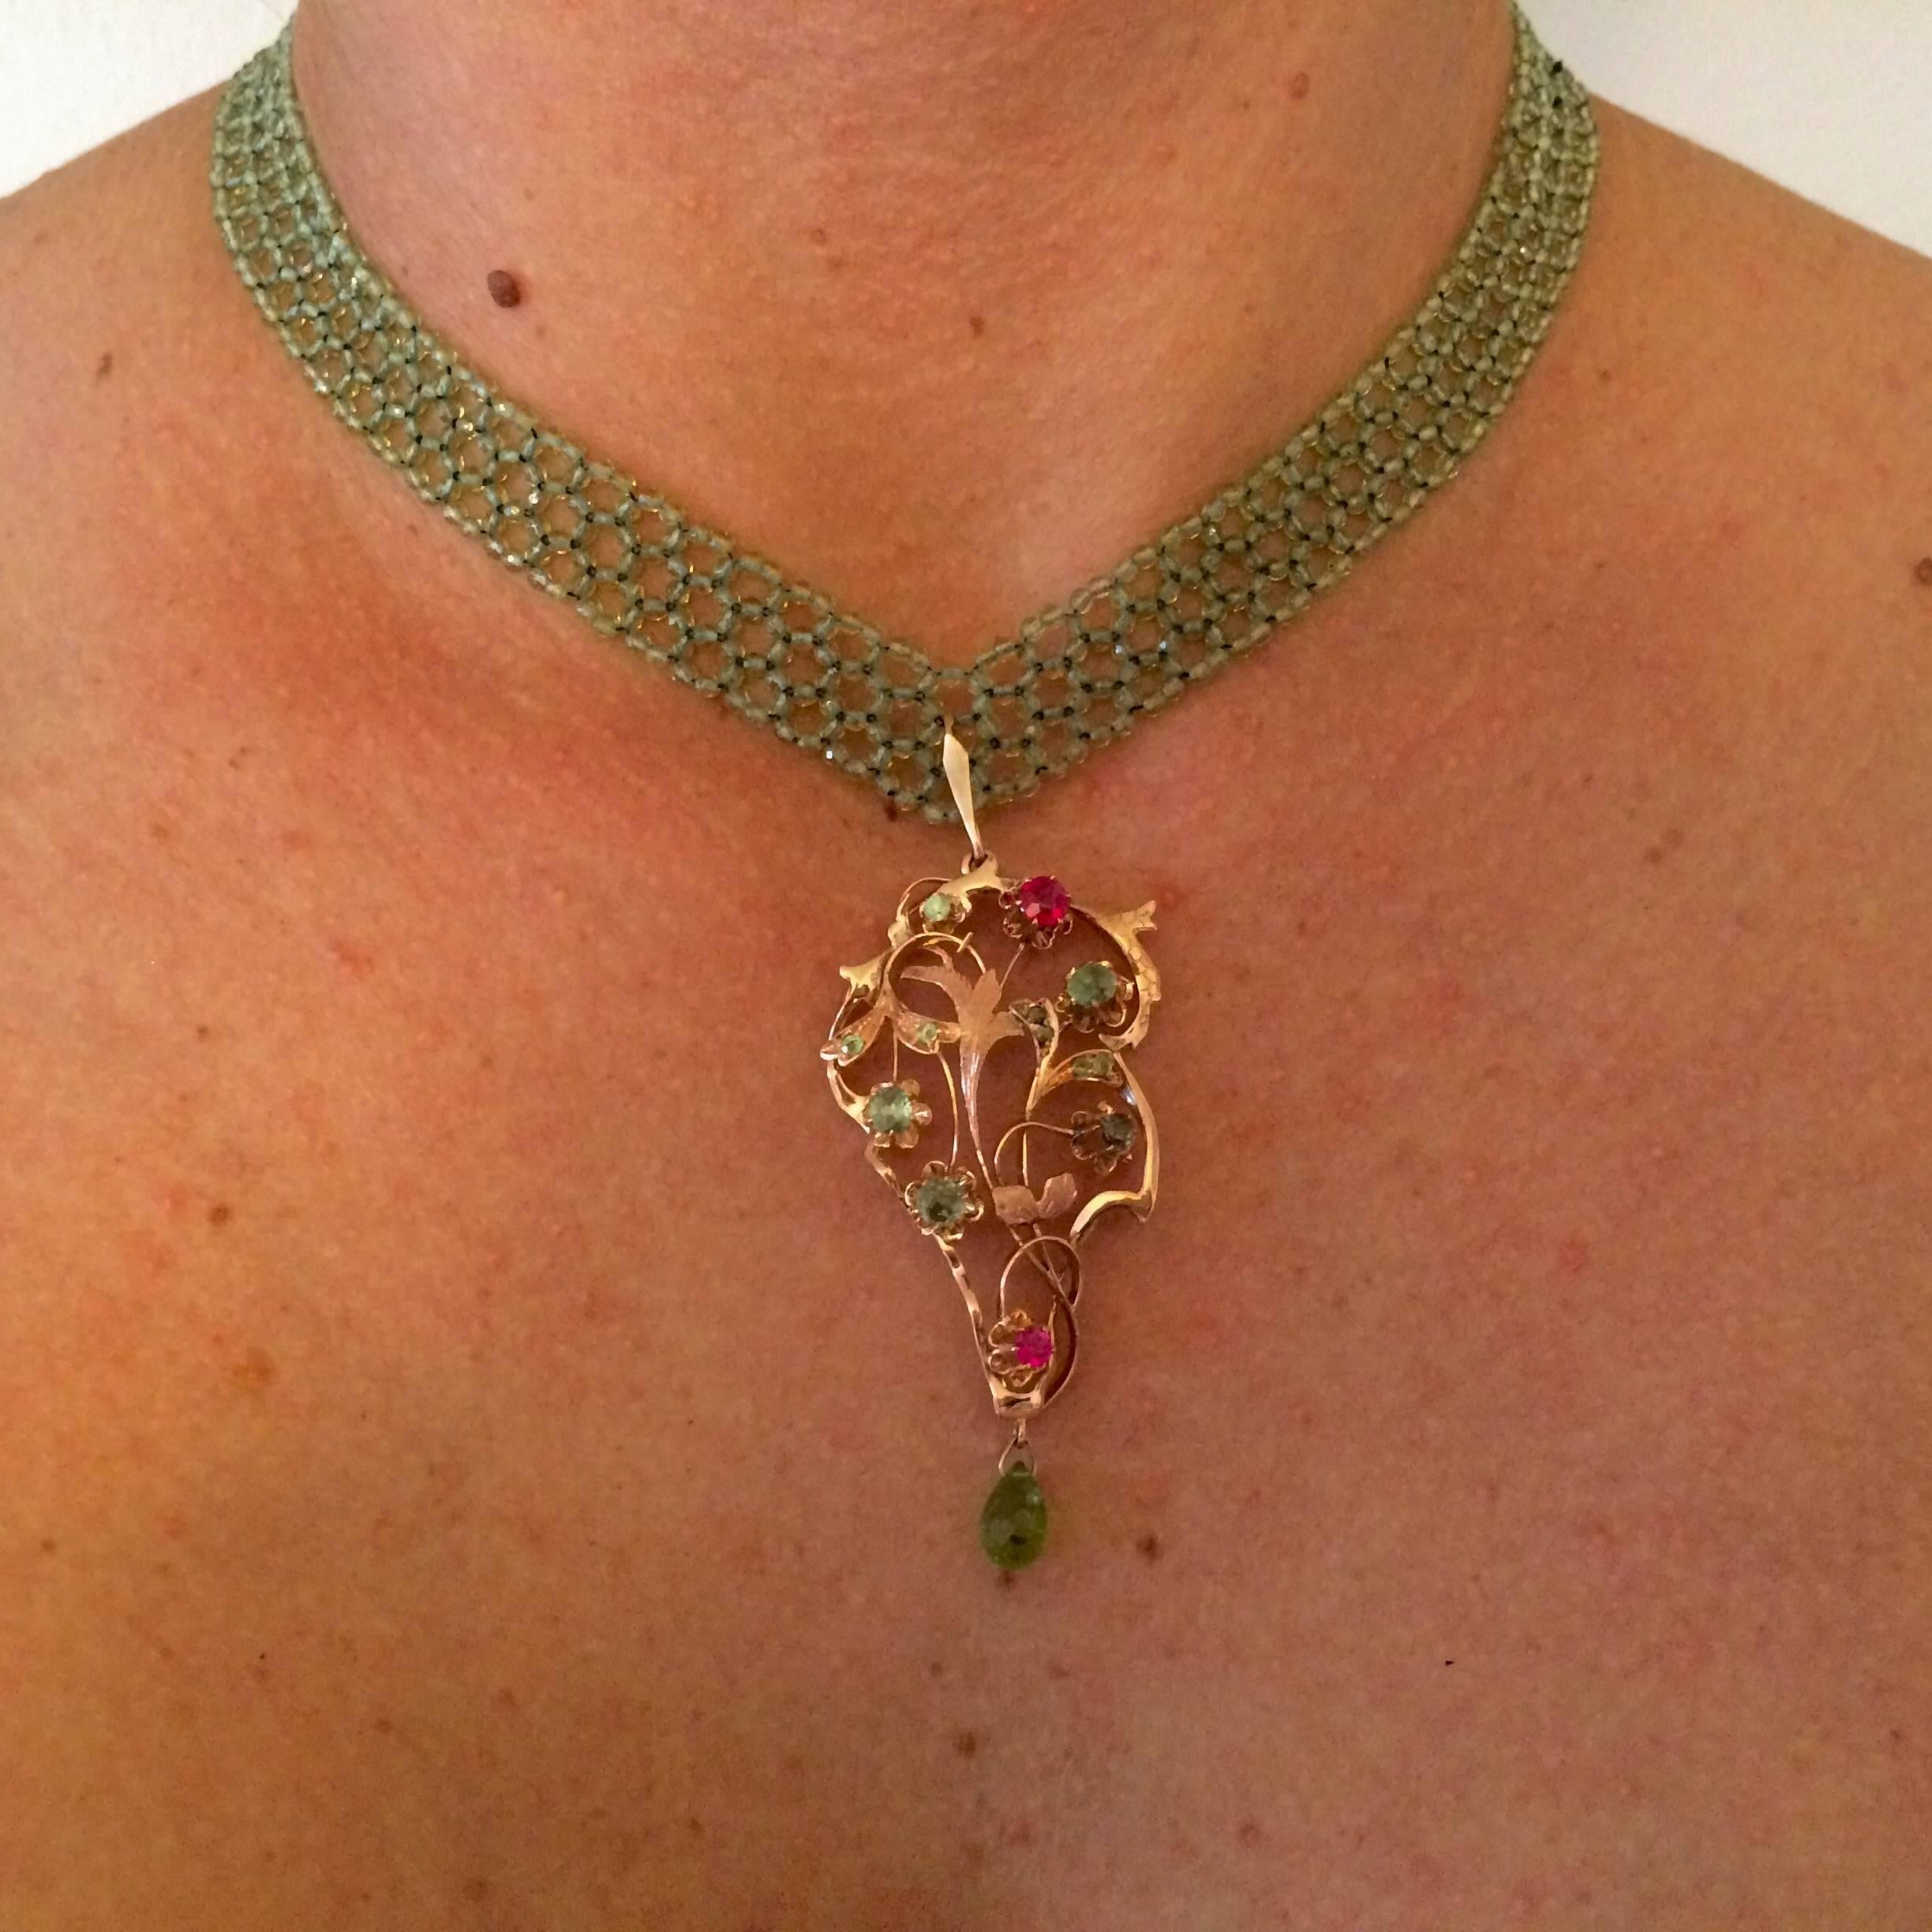 Woven Peridot Bead Necklace with Brooch of Ruby Peridot and Gold 1